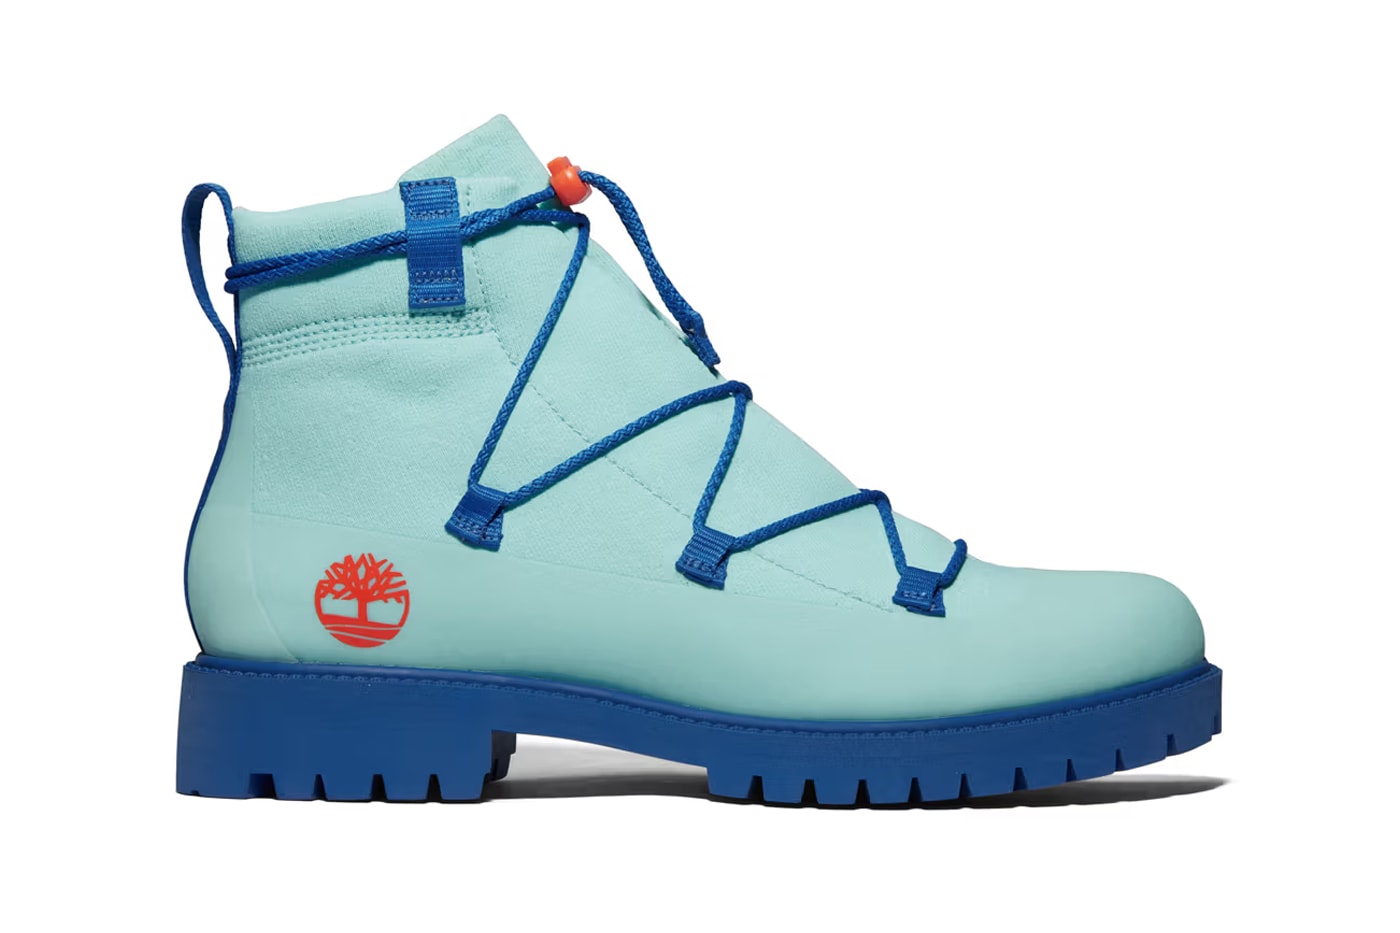 timberland suzanne oude hengel future73 collection collaboration info footwear boots clogs 